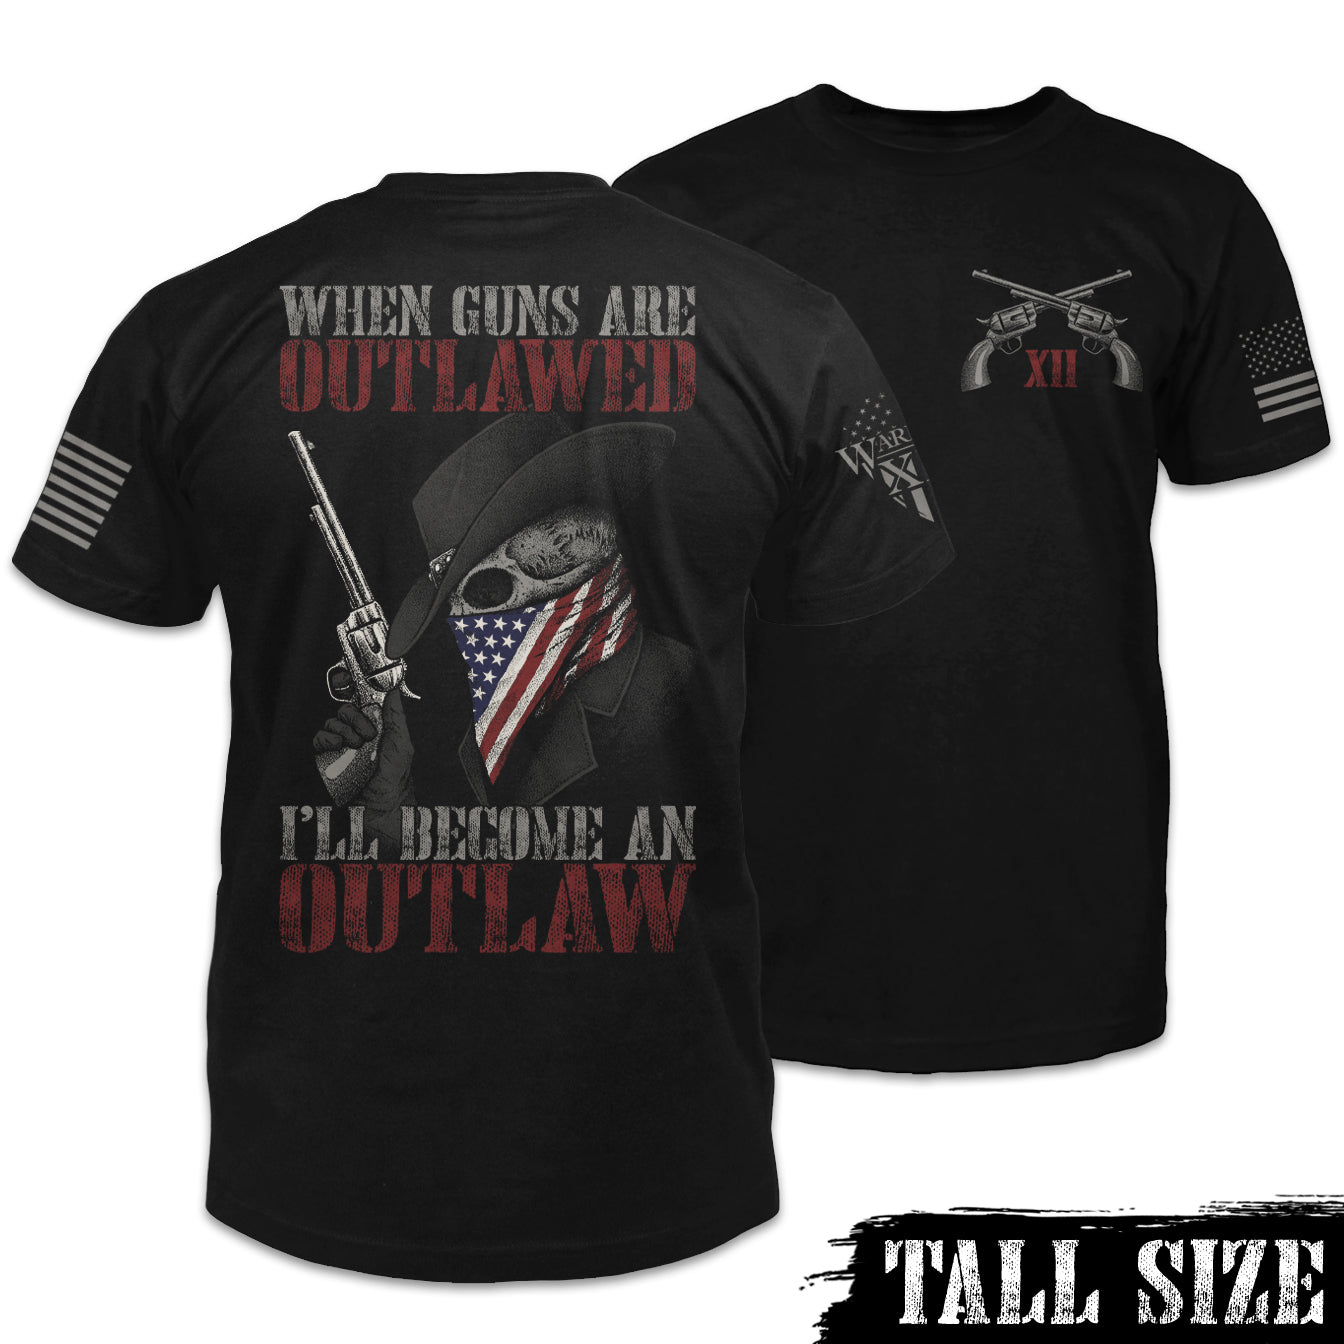 Front & back black tall size shirt with the words "When guns are outlawed, I'll become an outlaw" with skeleton holding a gun printed on the shirt.